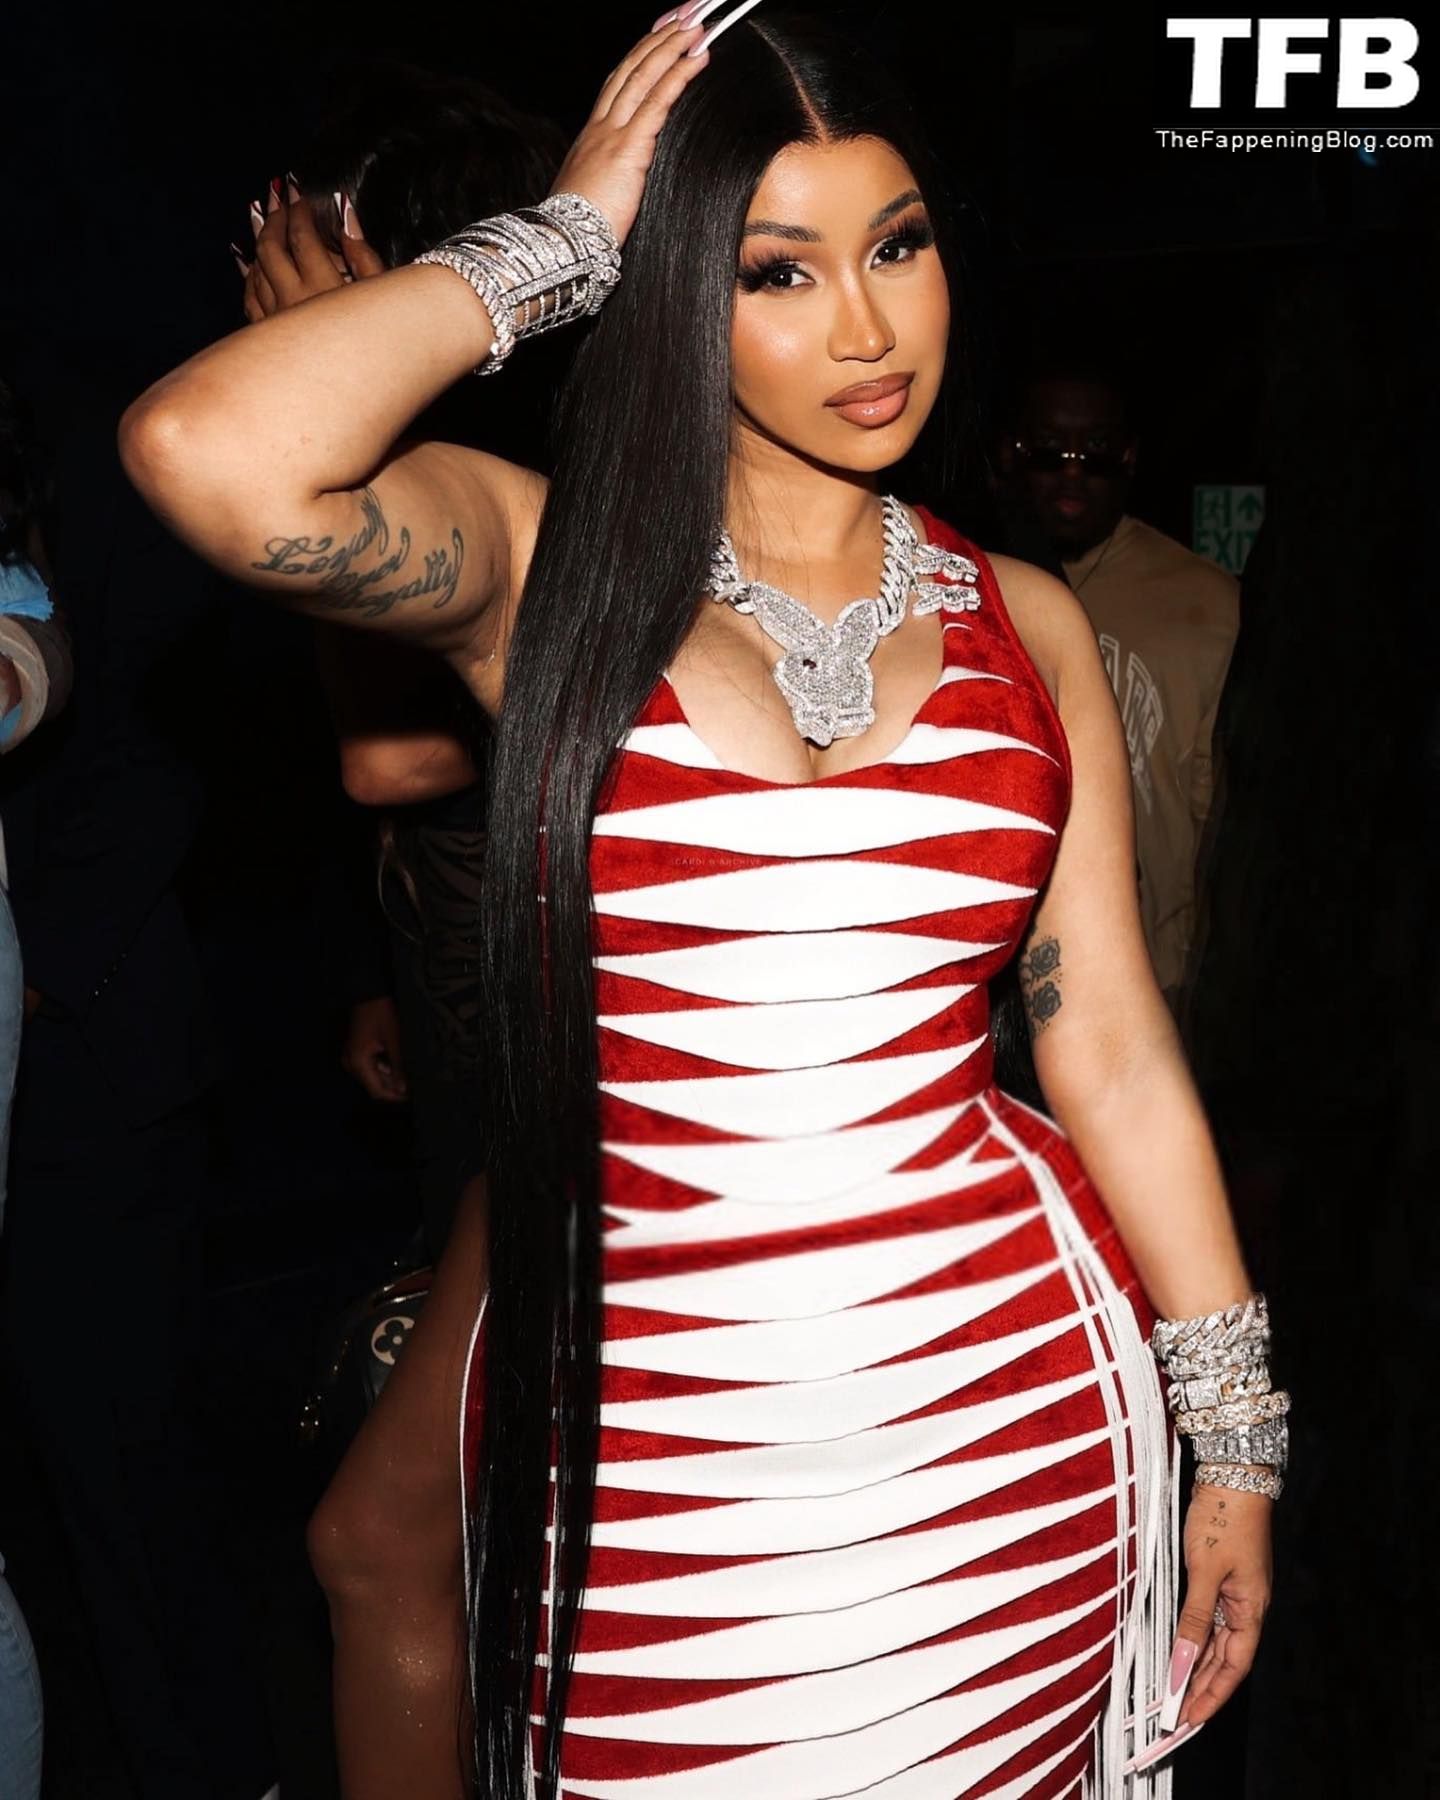 Cardi B Sexy The Fappening Blog 2 - Cardi B Flaunts Her Cleavage as She Leaves a Club with Offset in NYC (8 Photos)